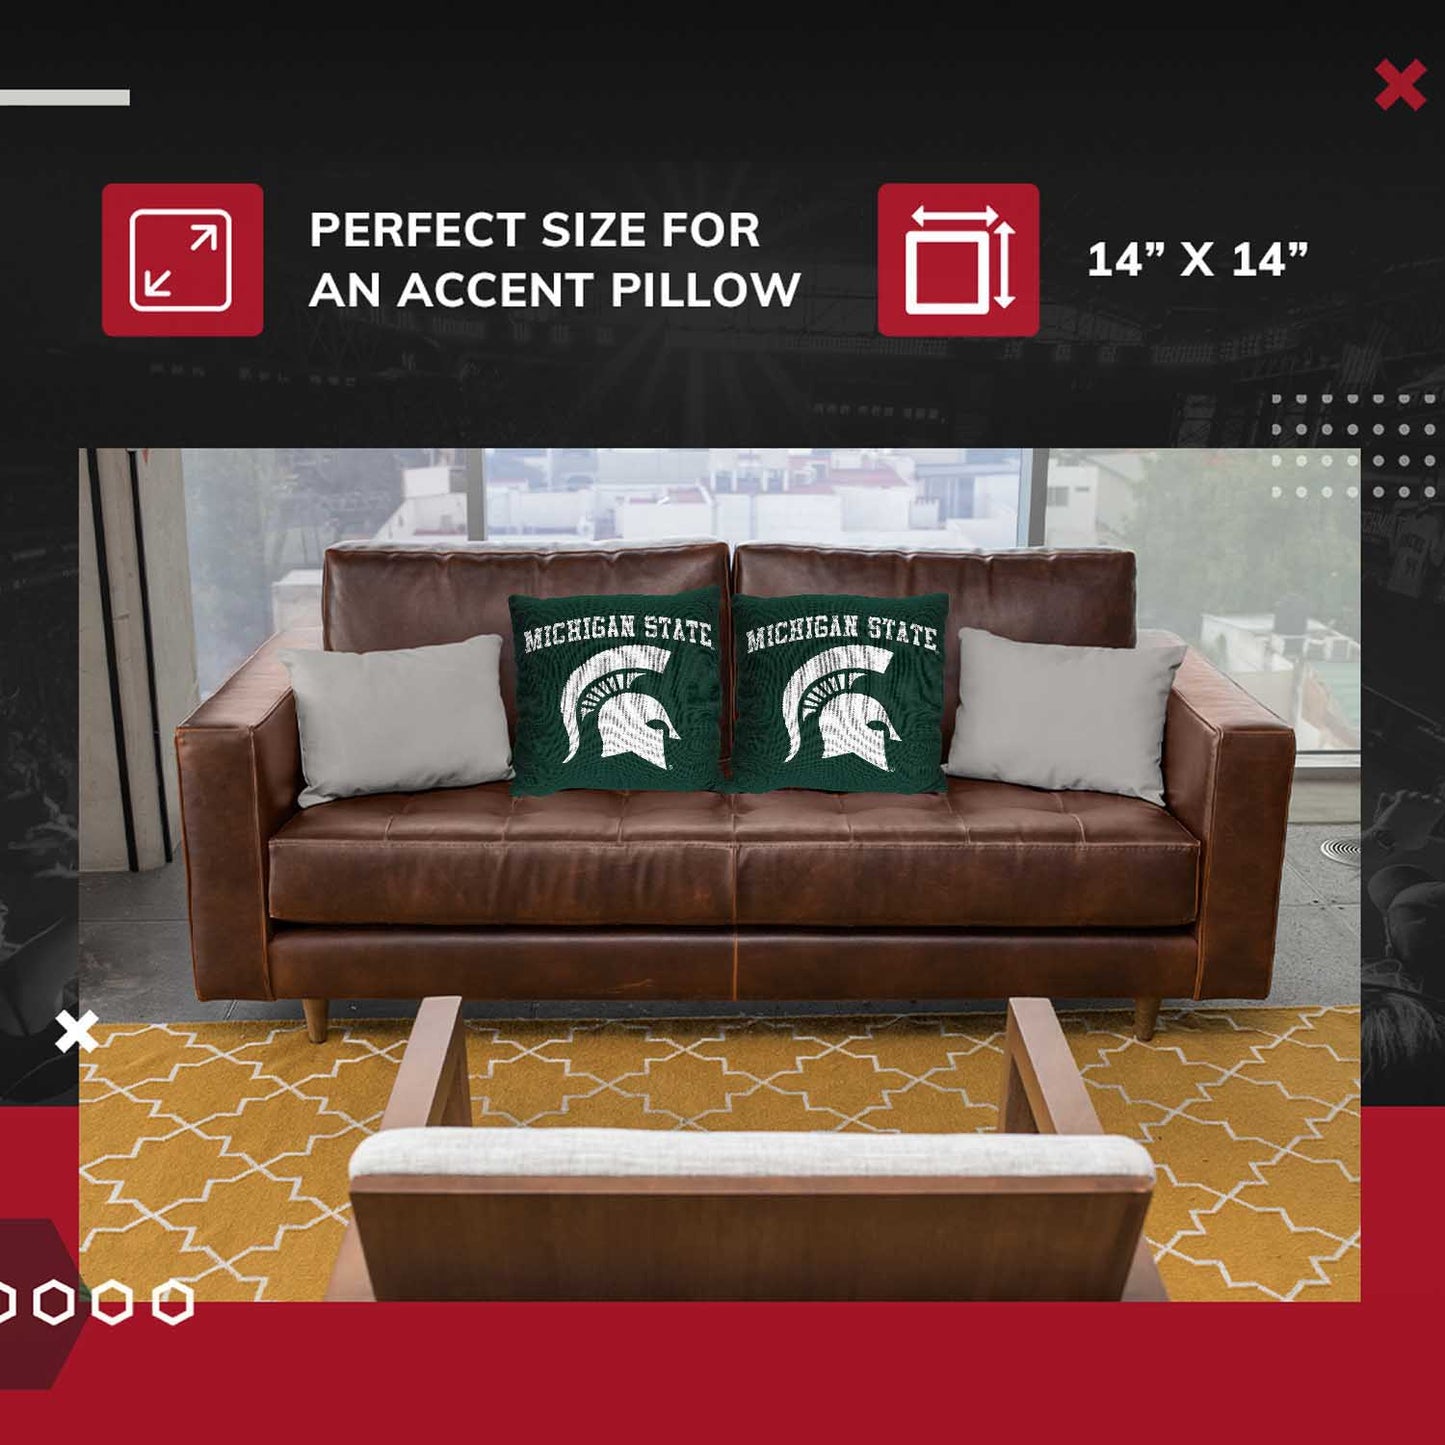 Michigan State Spartans NCAA Decorative Pillow - Green